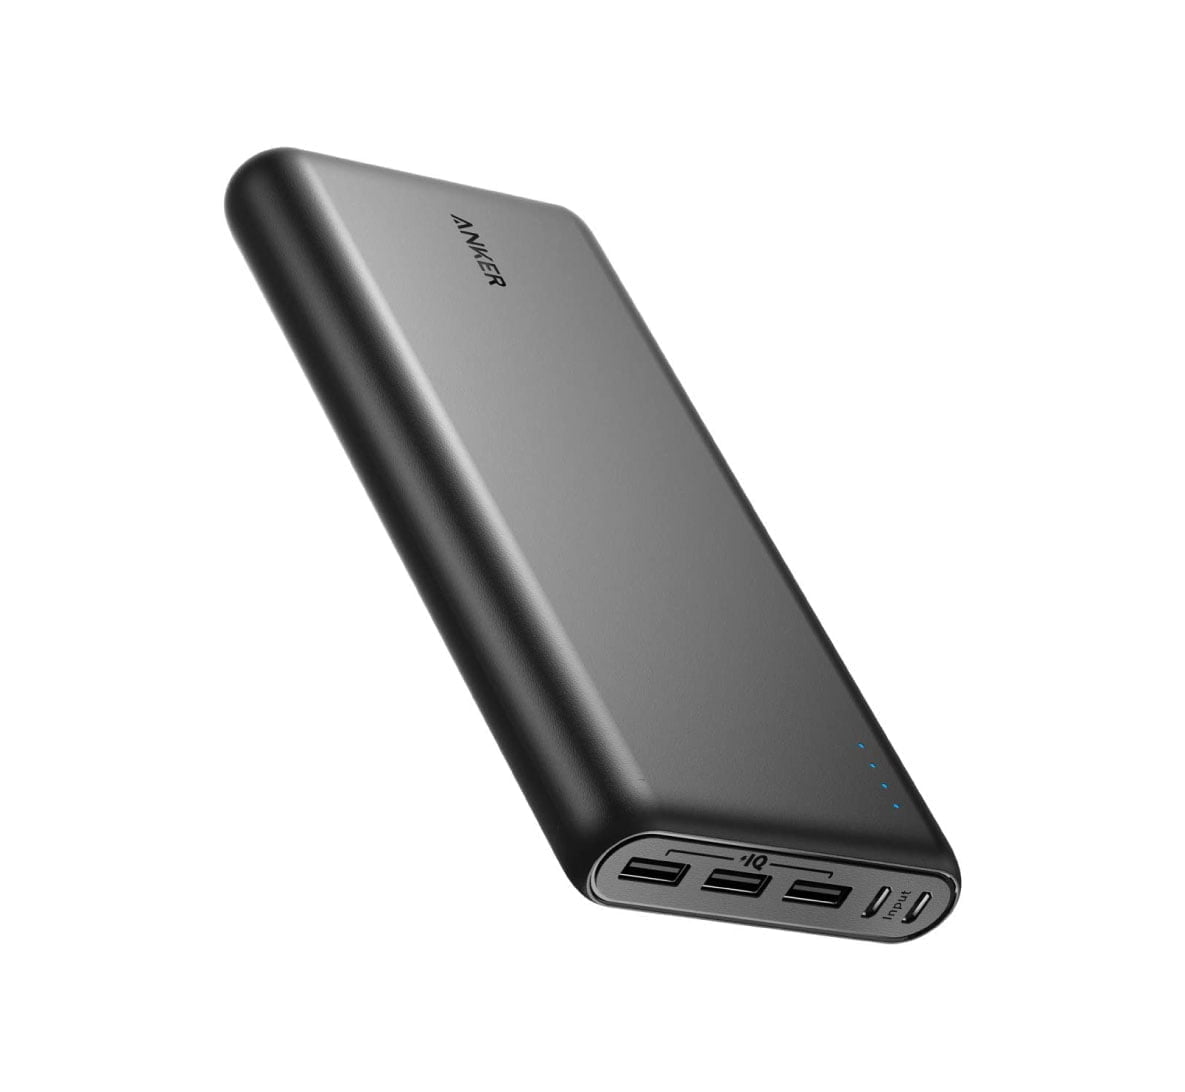 Anker &Amp;Lt;H1&Amp;Gt;Anker Astro Powercore 26800Ah&Amp;Lt;/H1&Amp;Gt; &Amp;Lt;Ul&Amp;Gt; &Amp;Lt;Li&Amp;Gt;The Anker Advantage: Join The 50 Million+ Powered By Our Leading Technology.&Amp;Lt;/Li&Amp;Gt; &Amp;Lt;Li&Amp;Gt;Colossal Capacity: 26800Mah Of Power Charges Most Phones Over 6 Times, Tablets At Least 2 Times, And Any Other Usb Device Multiple Times.&Amp;Lt;/Li&Amp;Gt; &Amp;Lt;Li&Amp;Gt;High-Speed Charging: 3 Usb Output Ports Equipped With Anker'S Poweriq And Voltage Boost Technology Ensure High-Speed Charging For Three Devices—Simultaneously (Not Compatible With Qualcomm Quick Charge).&Amp;Lt;/Li&Amp;Gt; &Amp;Lt;Li&Amp;Gt;Recharge 2X Faster: Dual Micro Usb (20W) Input Offers Recharge Speeds Up To Twice As Fast As Standard Portable Chargers—A Full Recharge Takes Just Over 6 Hours While Using Both Input Ports (Wall Charger Not Included).&Amp;Lt;/Li&Amp;Gt; &Amp;Lt;Li&Amp;Gt;What You Get: Power Core 26800, 2X Micro Usb Cable, Travel Pouch, Welcome Guide, Anker Worry-Free 18-Month, And Friendly Customer Service. Usb-C Cable And Lightning Cable For Iphone/ Ipad Sold Separately.&Amp;Lt;/Li&Amp;Gt; &Amp;Lt;/Ul&Amp;Gt; [Video Width=&Amp;Quot;720&Amp;Quot; Height=&Amp;Quot;404&Amp;Quot; Mp4=&Amp;Quot;Https://Lablaab.com/Wp-Content/Uploads/2020/06/C1S5Otzqjws.mp4&Amp;Quot;][/Video] Anker Astro Powercore 26800Ah Anker Astro Powercore 26800Ah